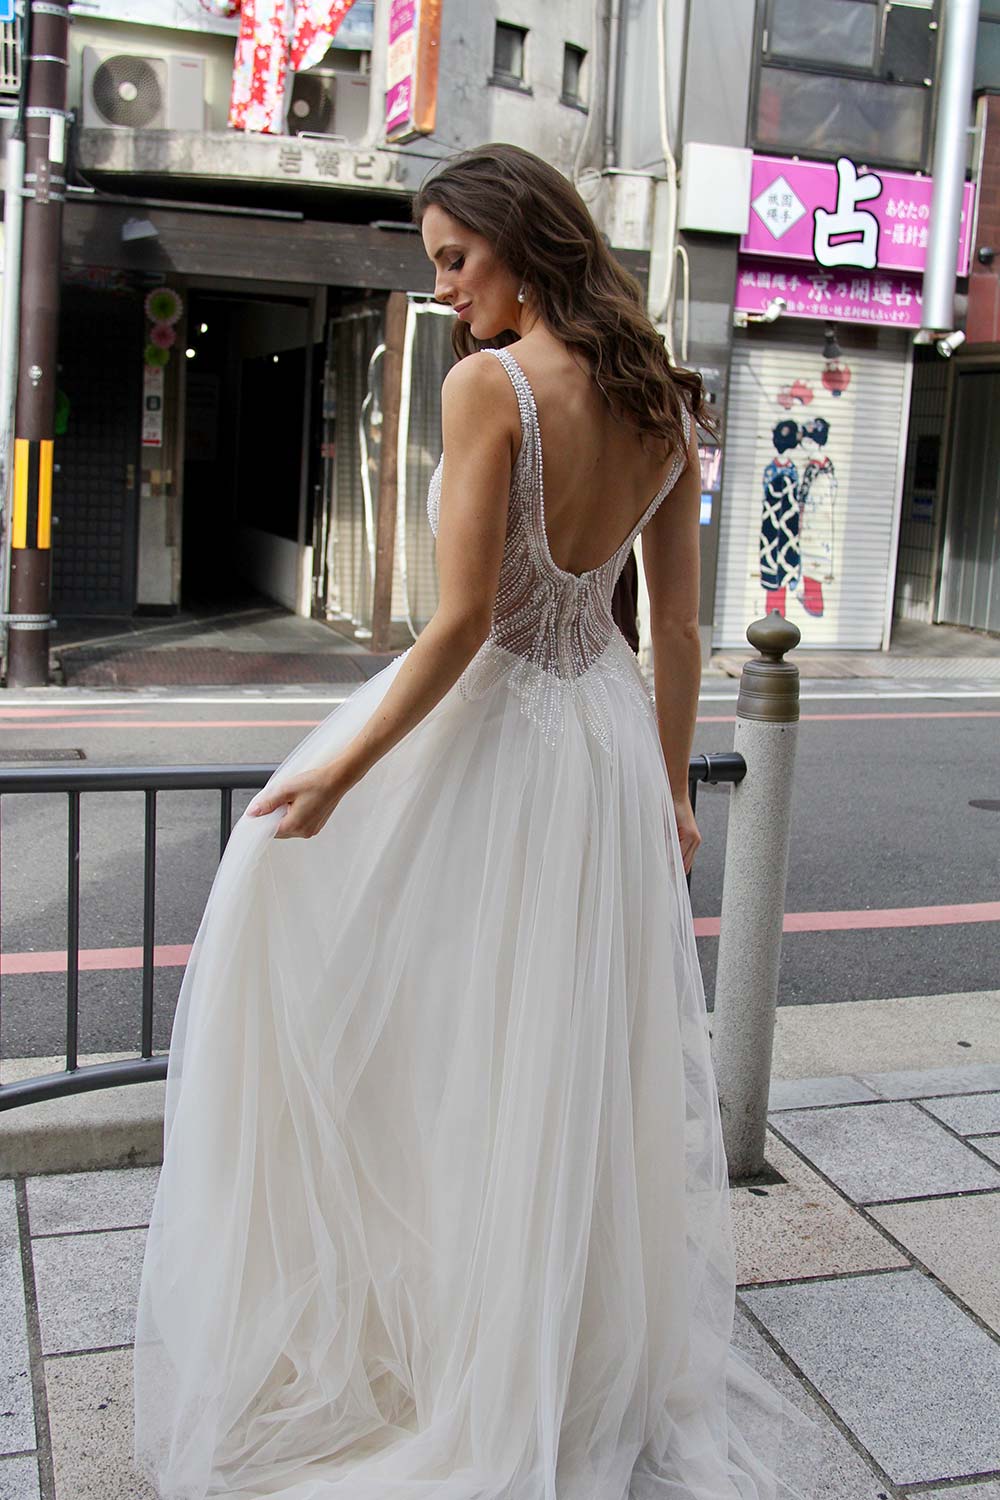 Female model wearing Vinka Design An Oriental Affair Wedding Dress. On a Japanese street the front detail of a gown with a hand-beaded, nude-based, semi sheer bodice with a deep v-neckline and low back with a tulle skirt.